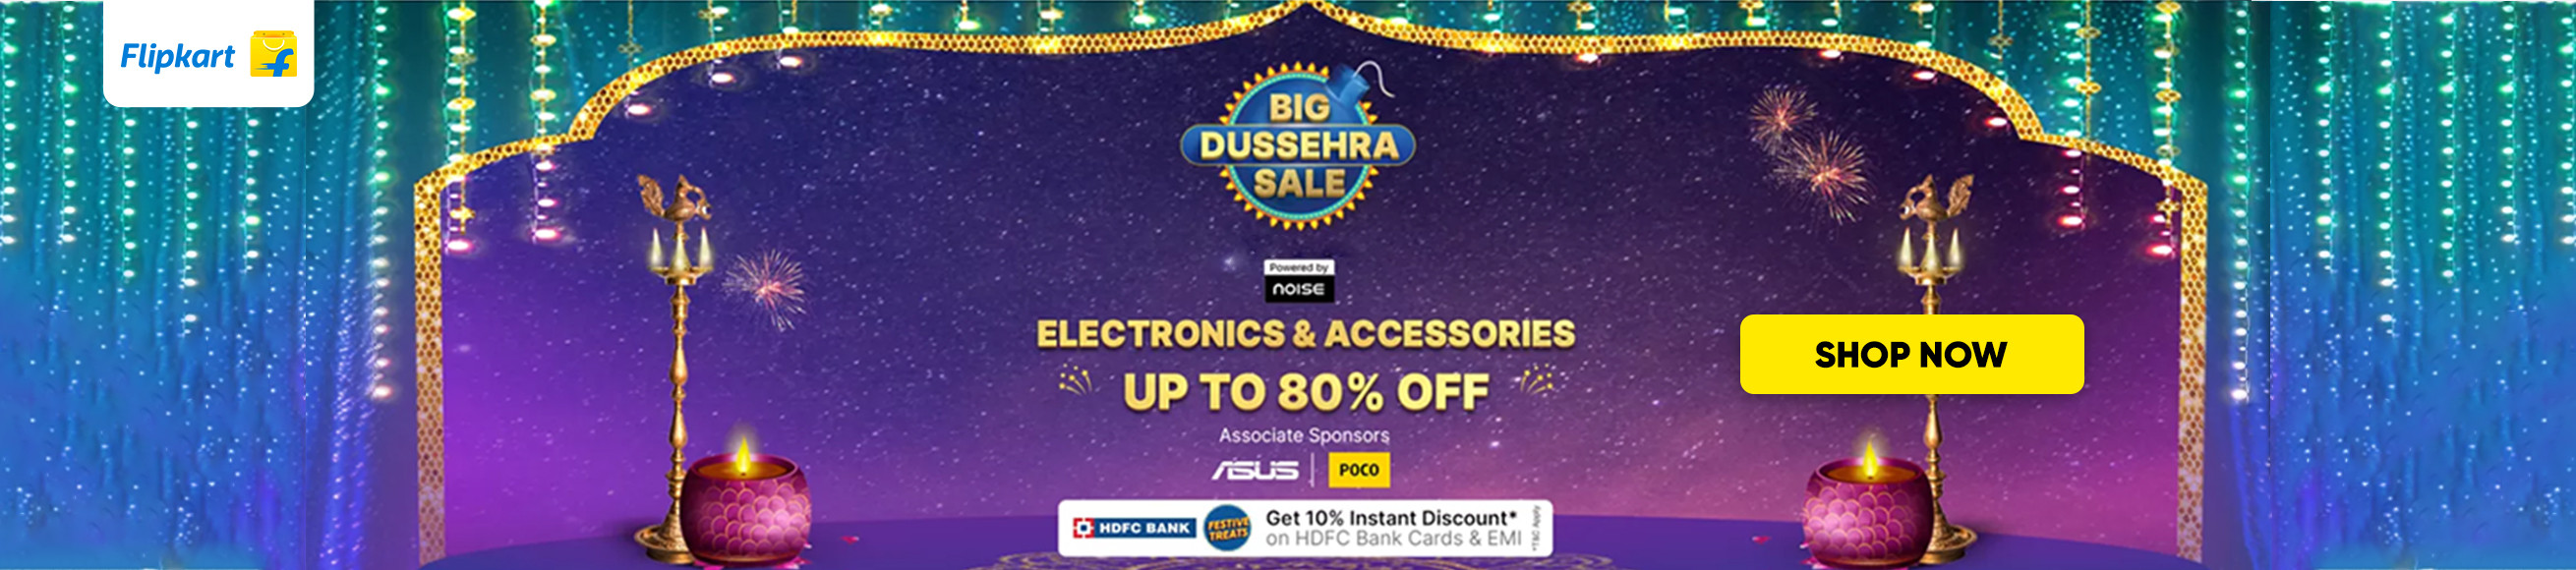 Flipkart The Big Billion Days Sale Offers & Deals on Electronics & Accessories - (23rd to 30th Sept)